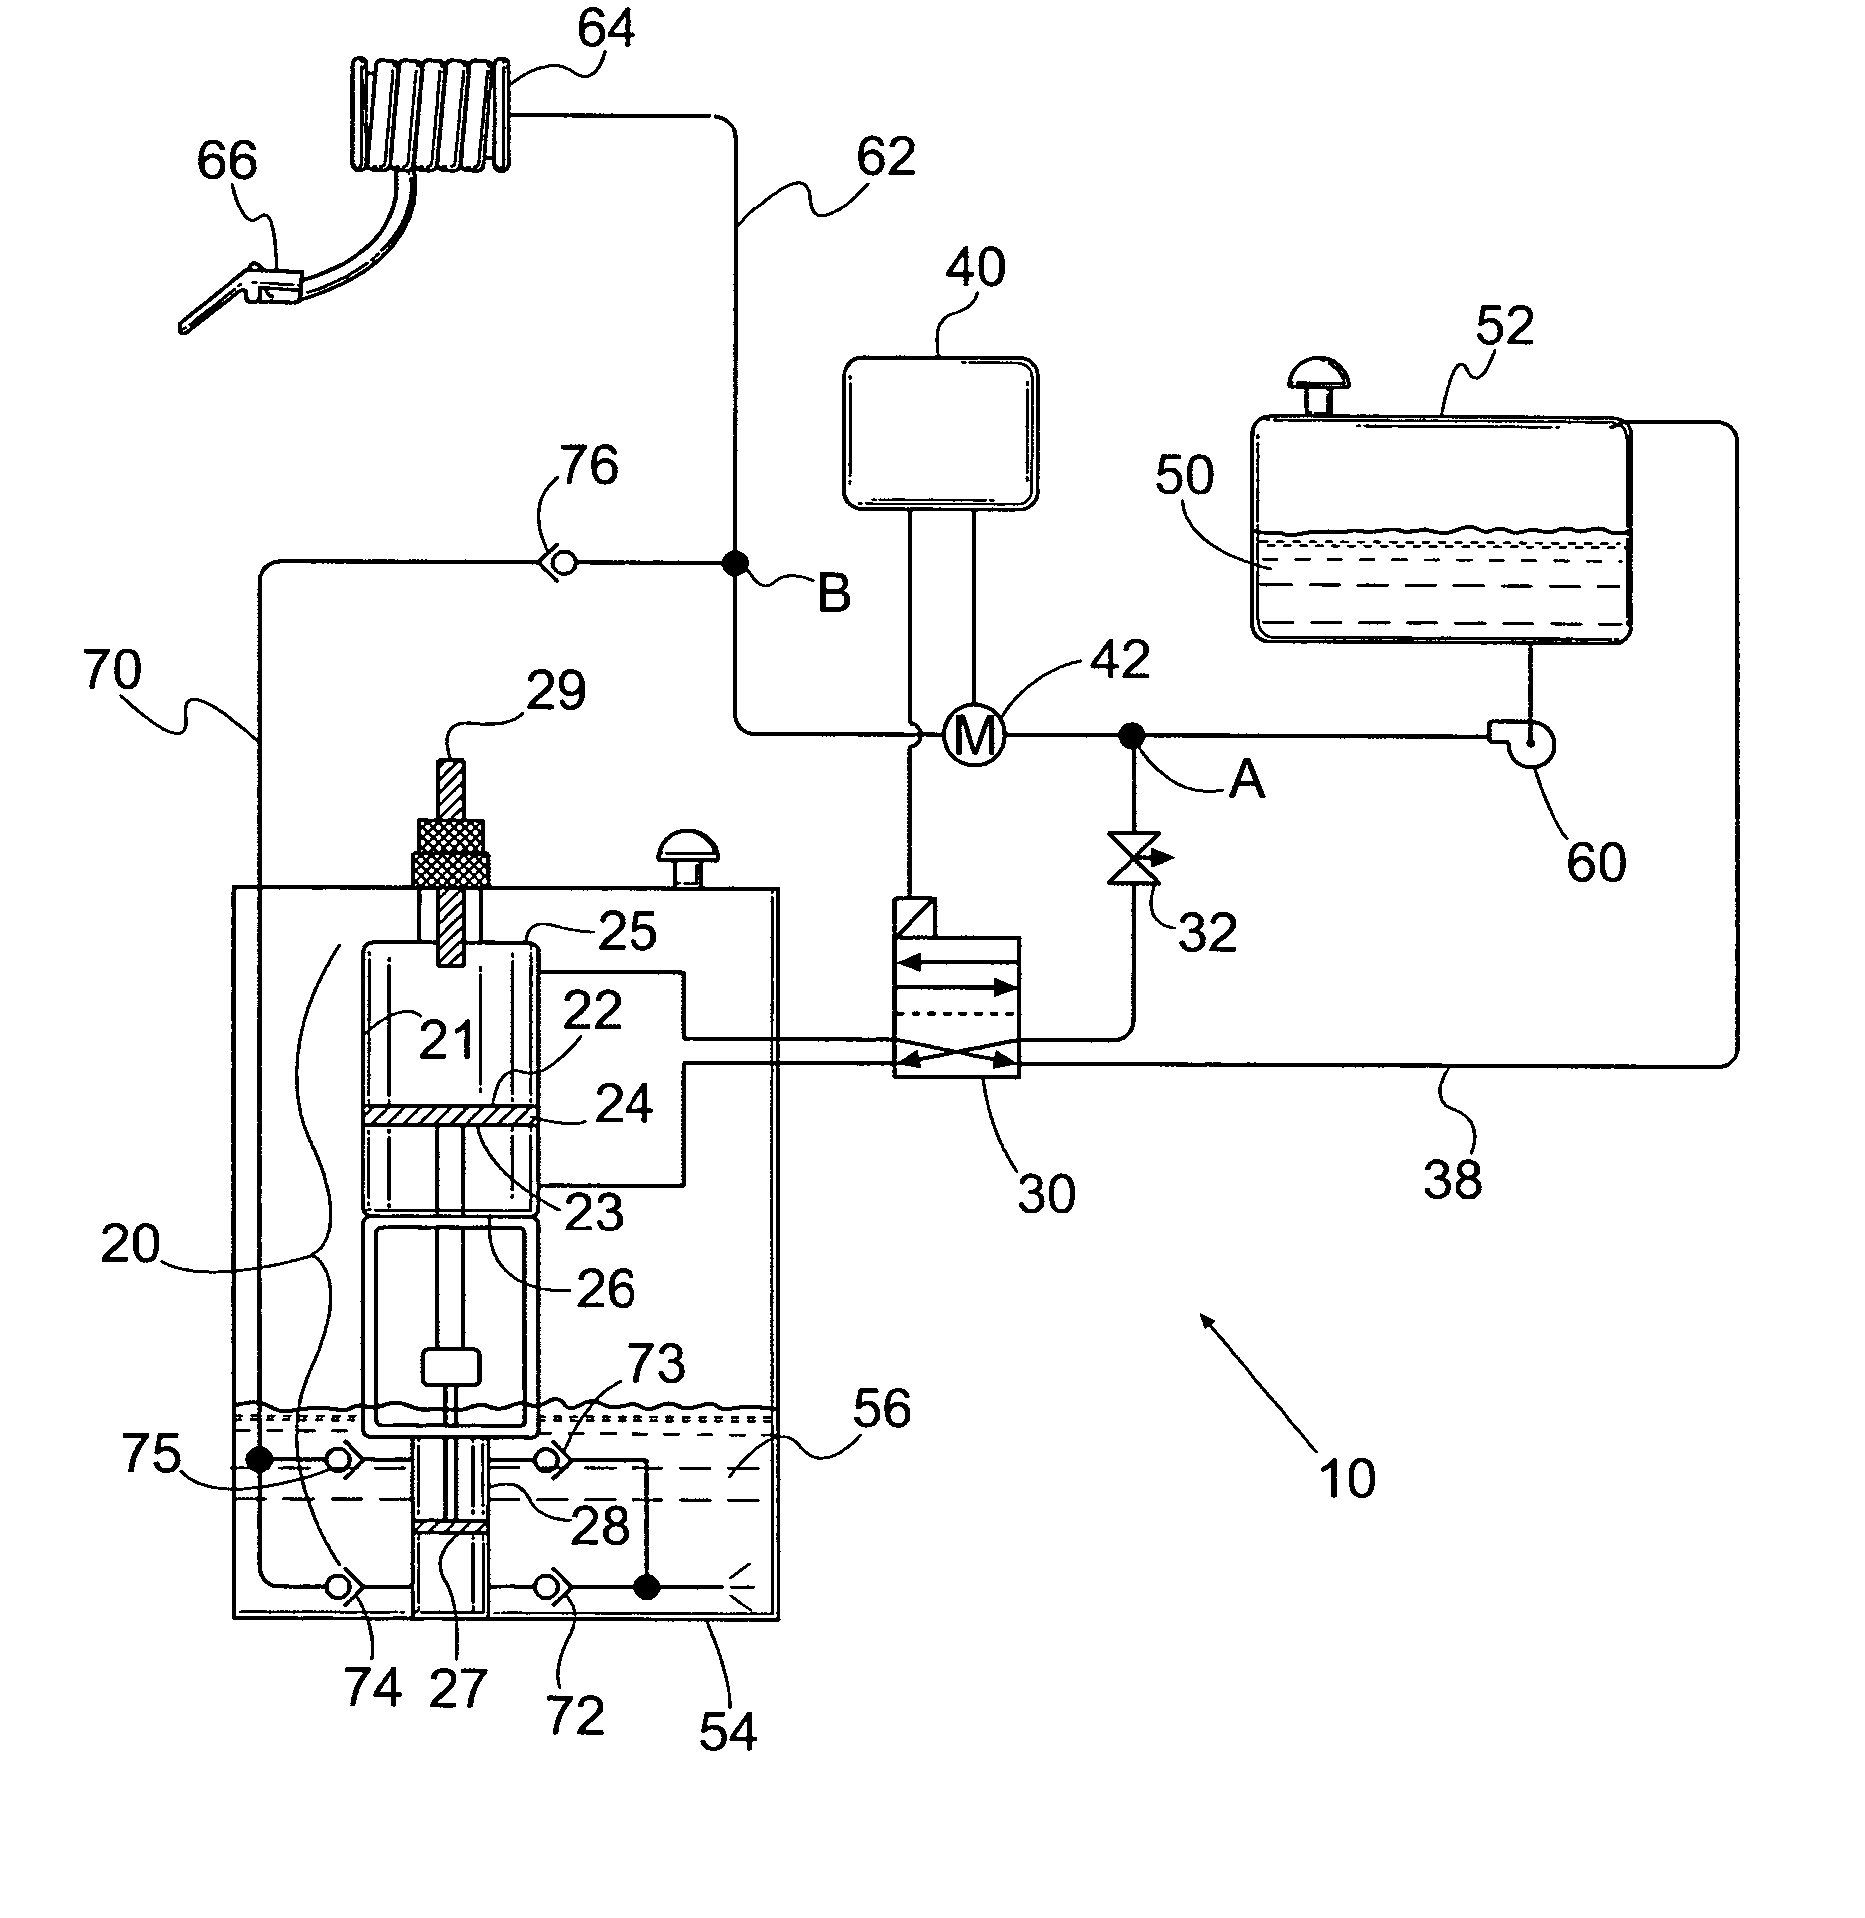 Fluid powered additive injection system